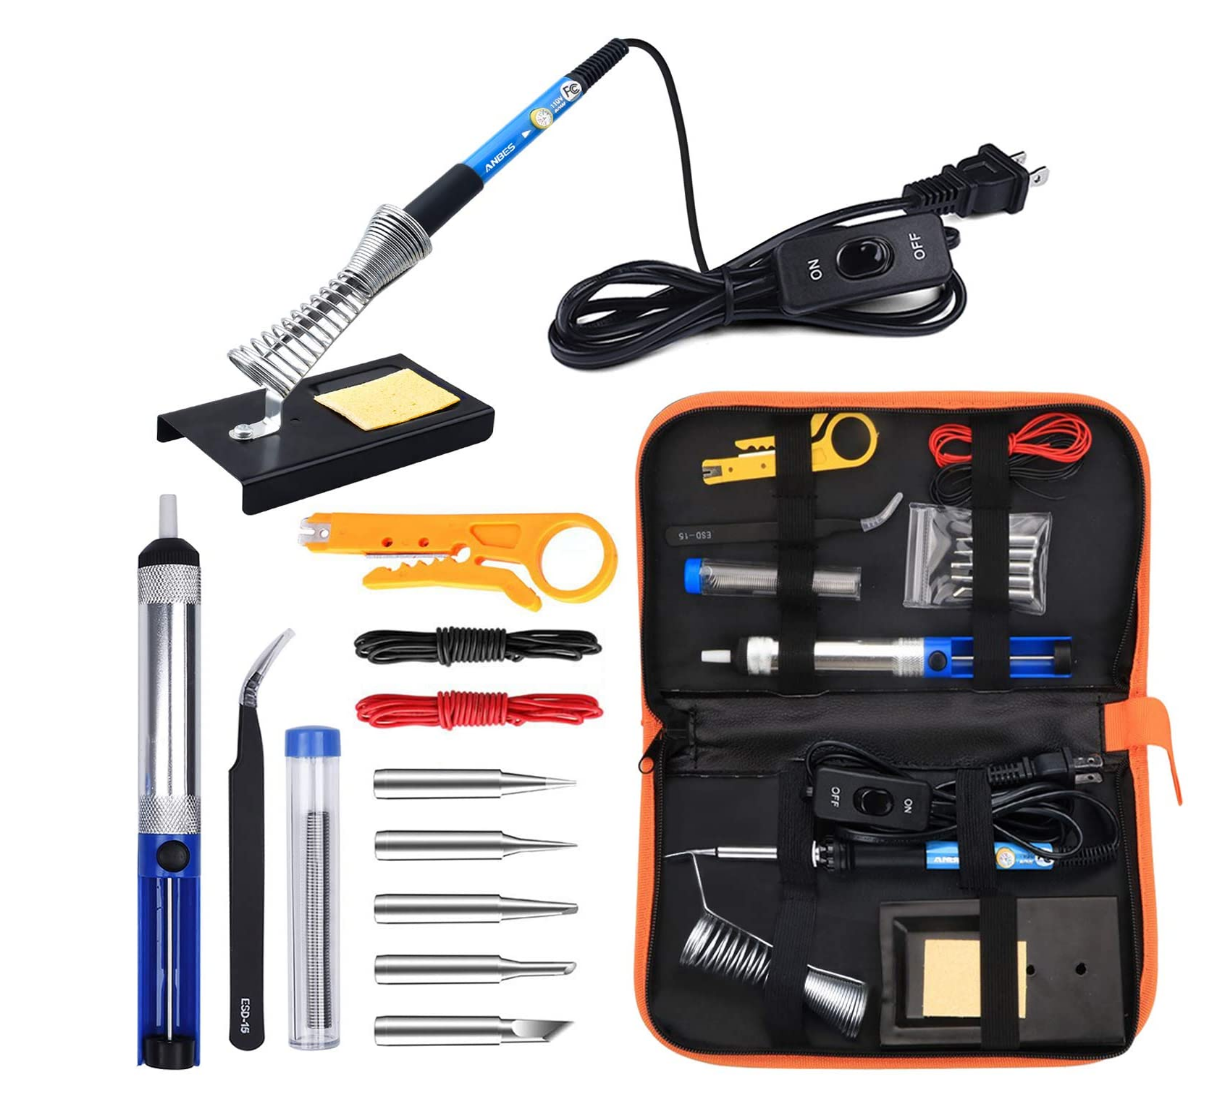 Anbes Soldering Iron Kit Electronics 60W Adjustable Welding Tool Review